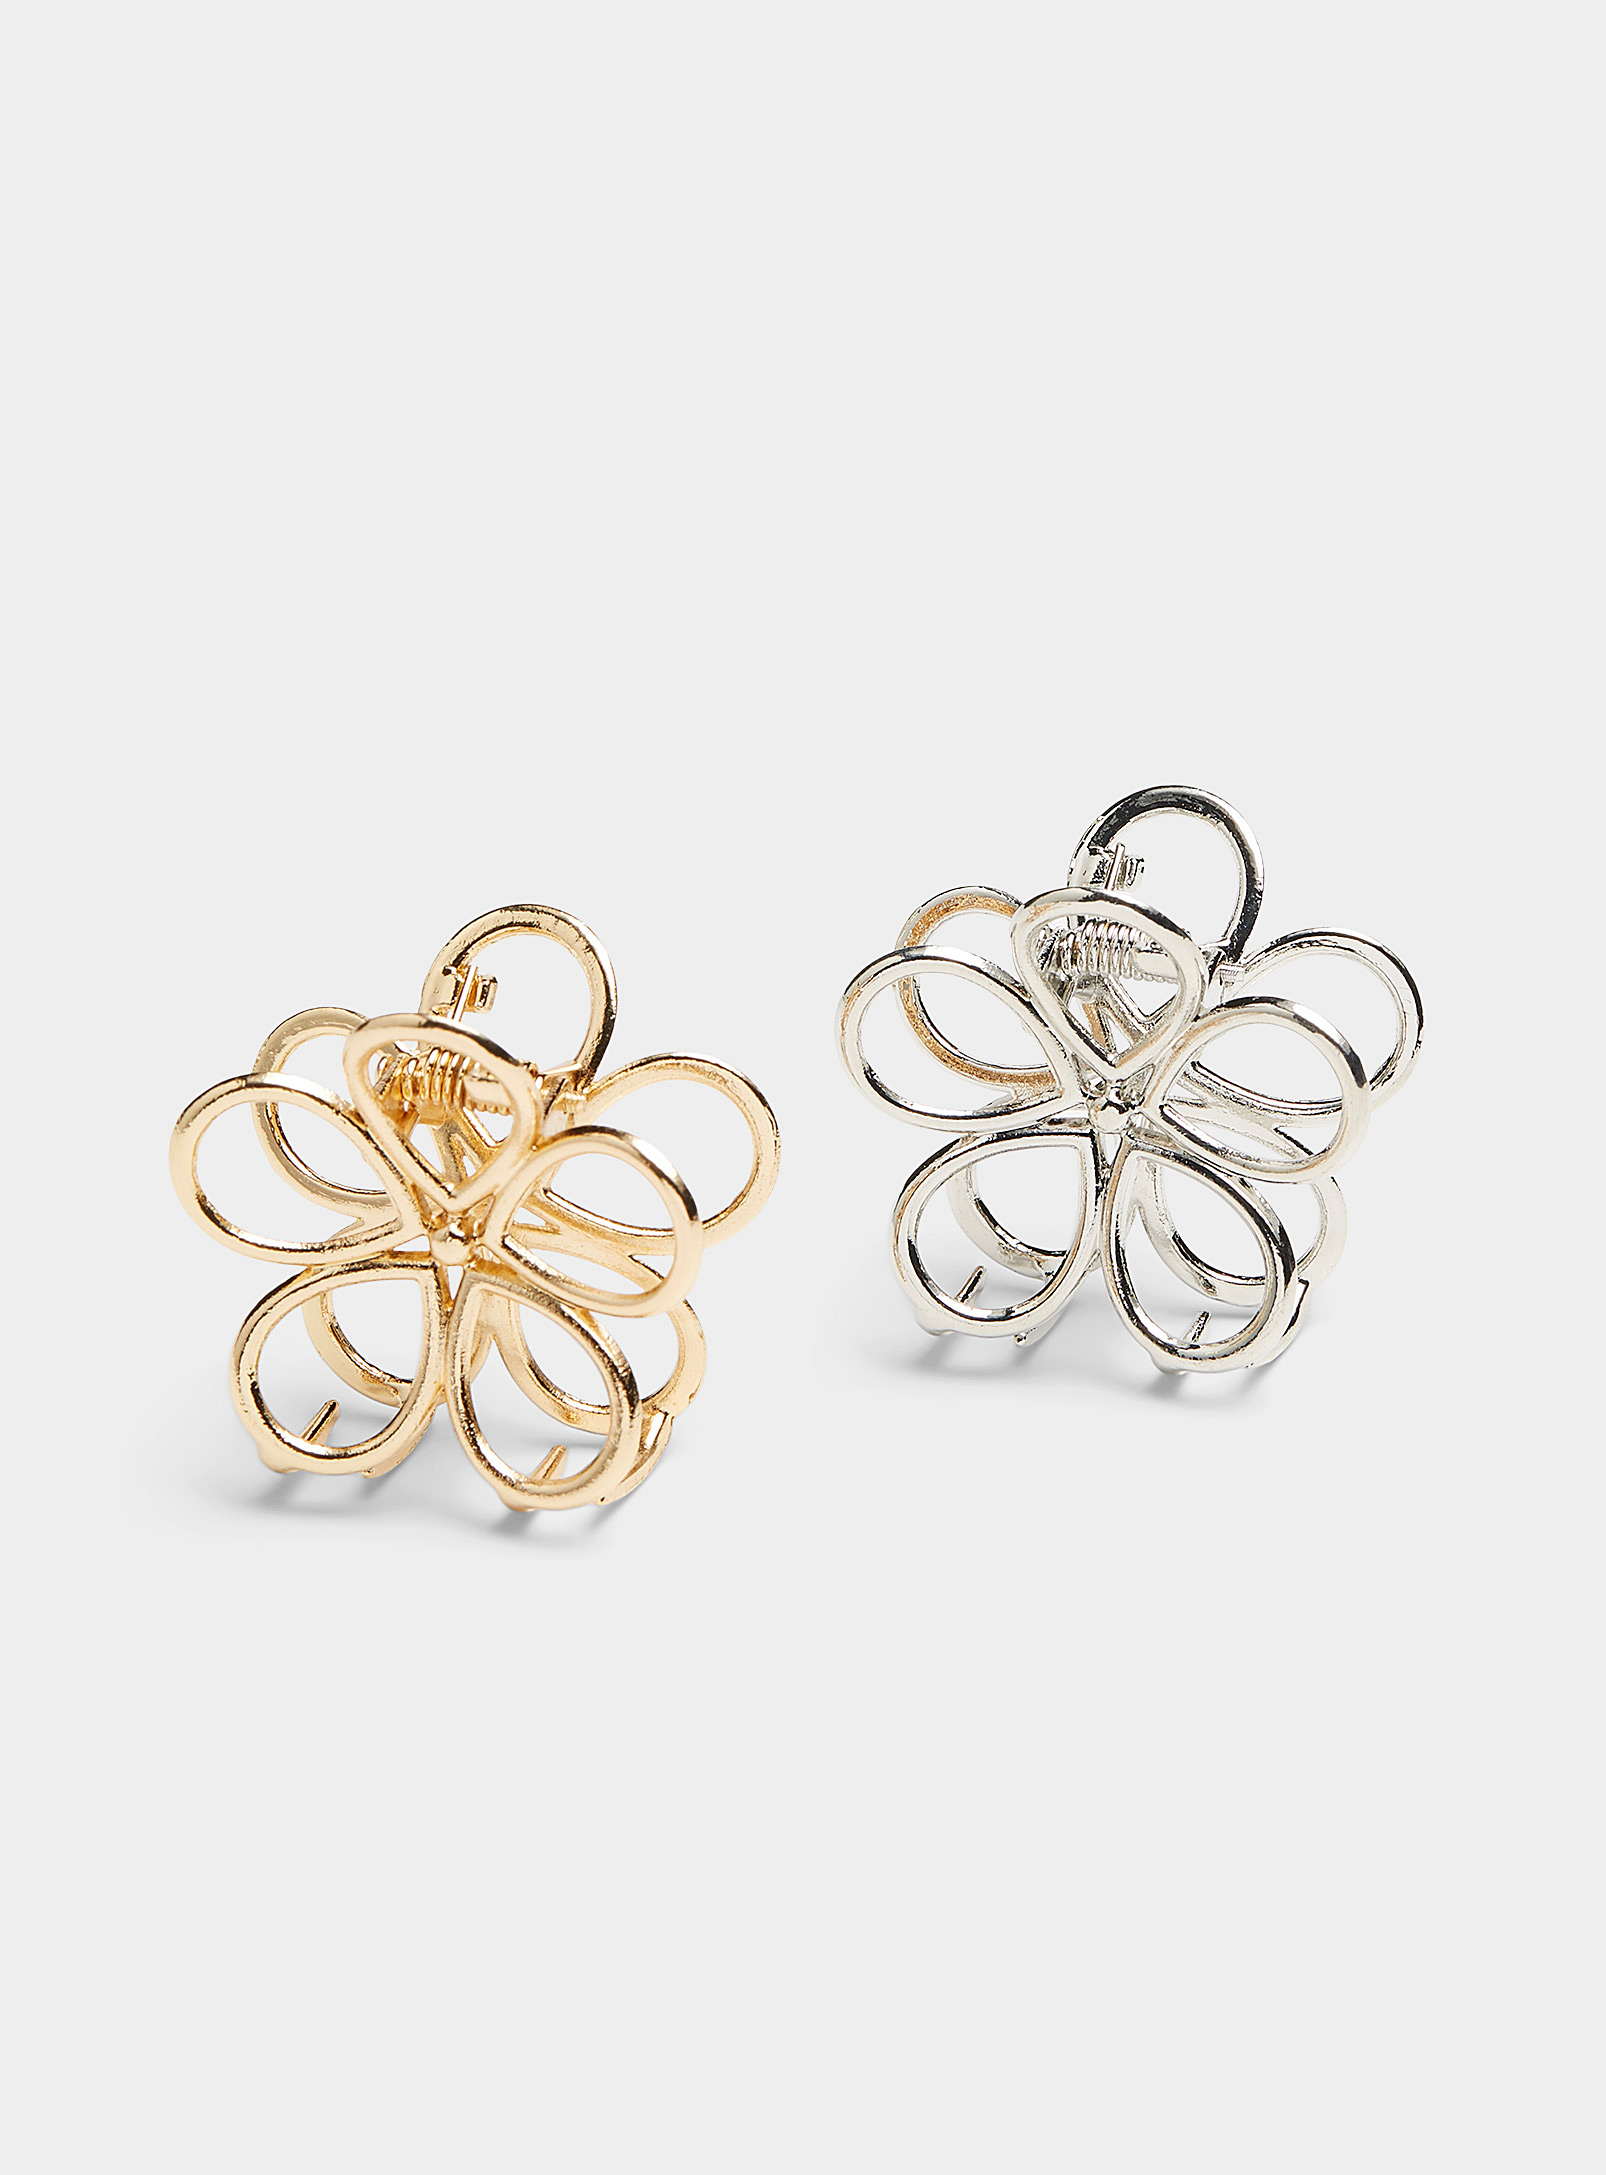 Simons - Women's Small openwork floral clips Set of 2